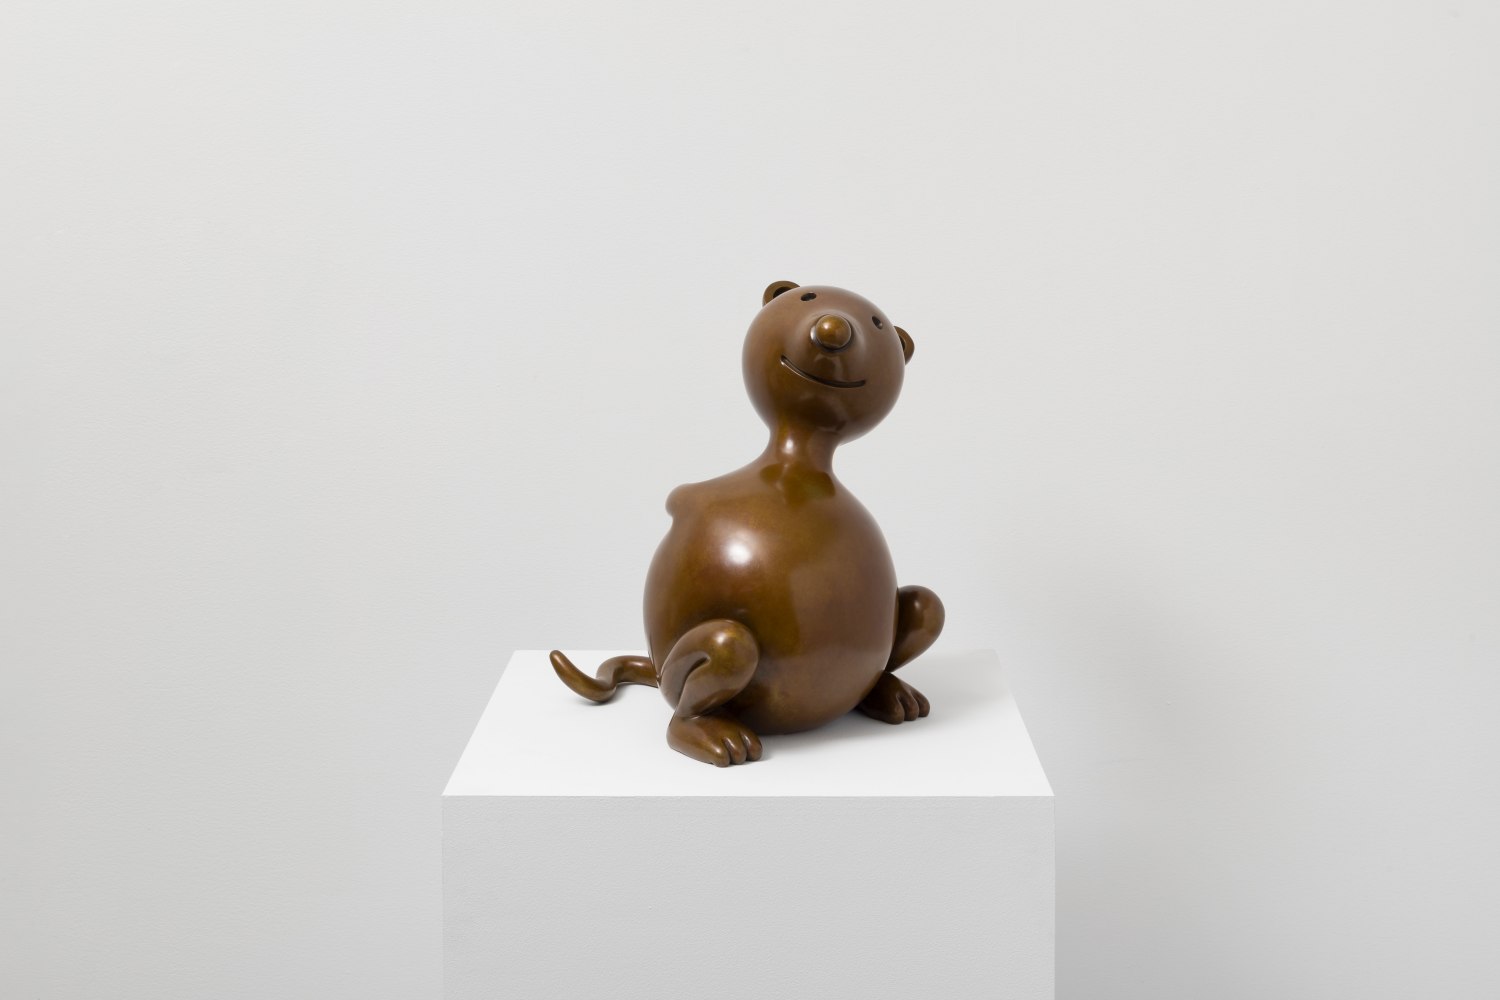 Tom Otterness
Mouse (medium), 2007
bronze, edition of 9
16 1/2 x 11 1/2 x 12 1/2 in. / 41.9 x 29.2 x 31.8 cm